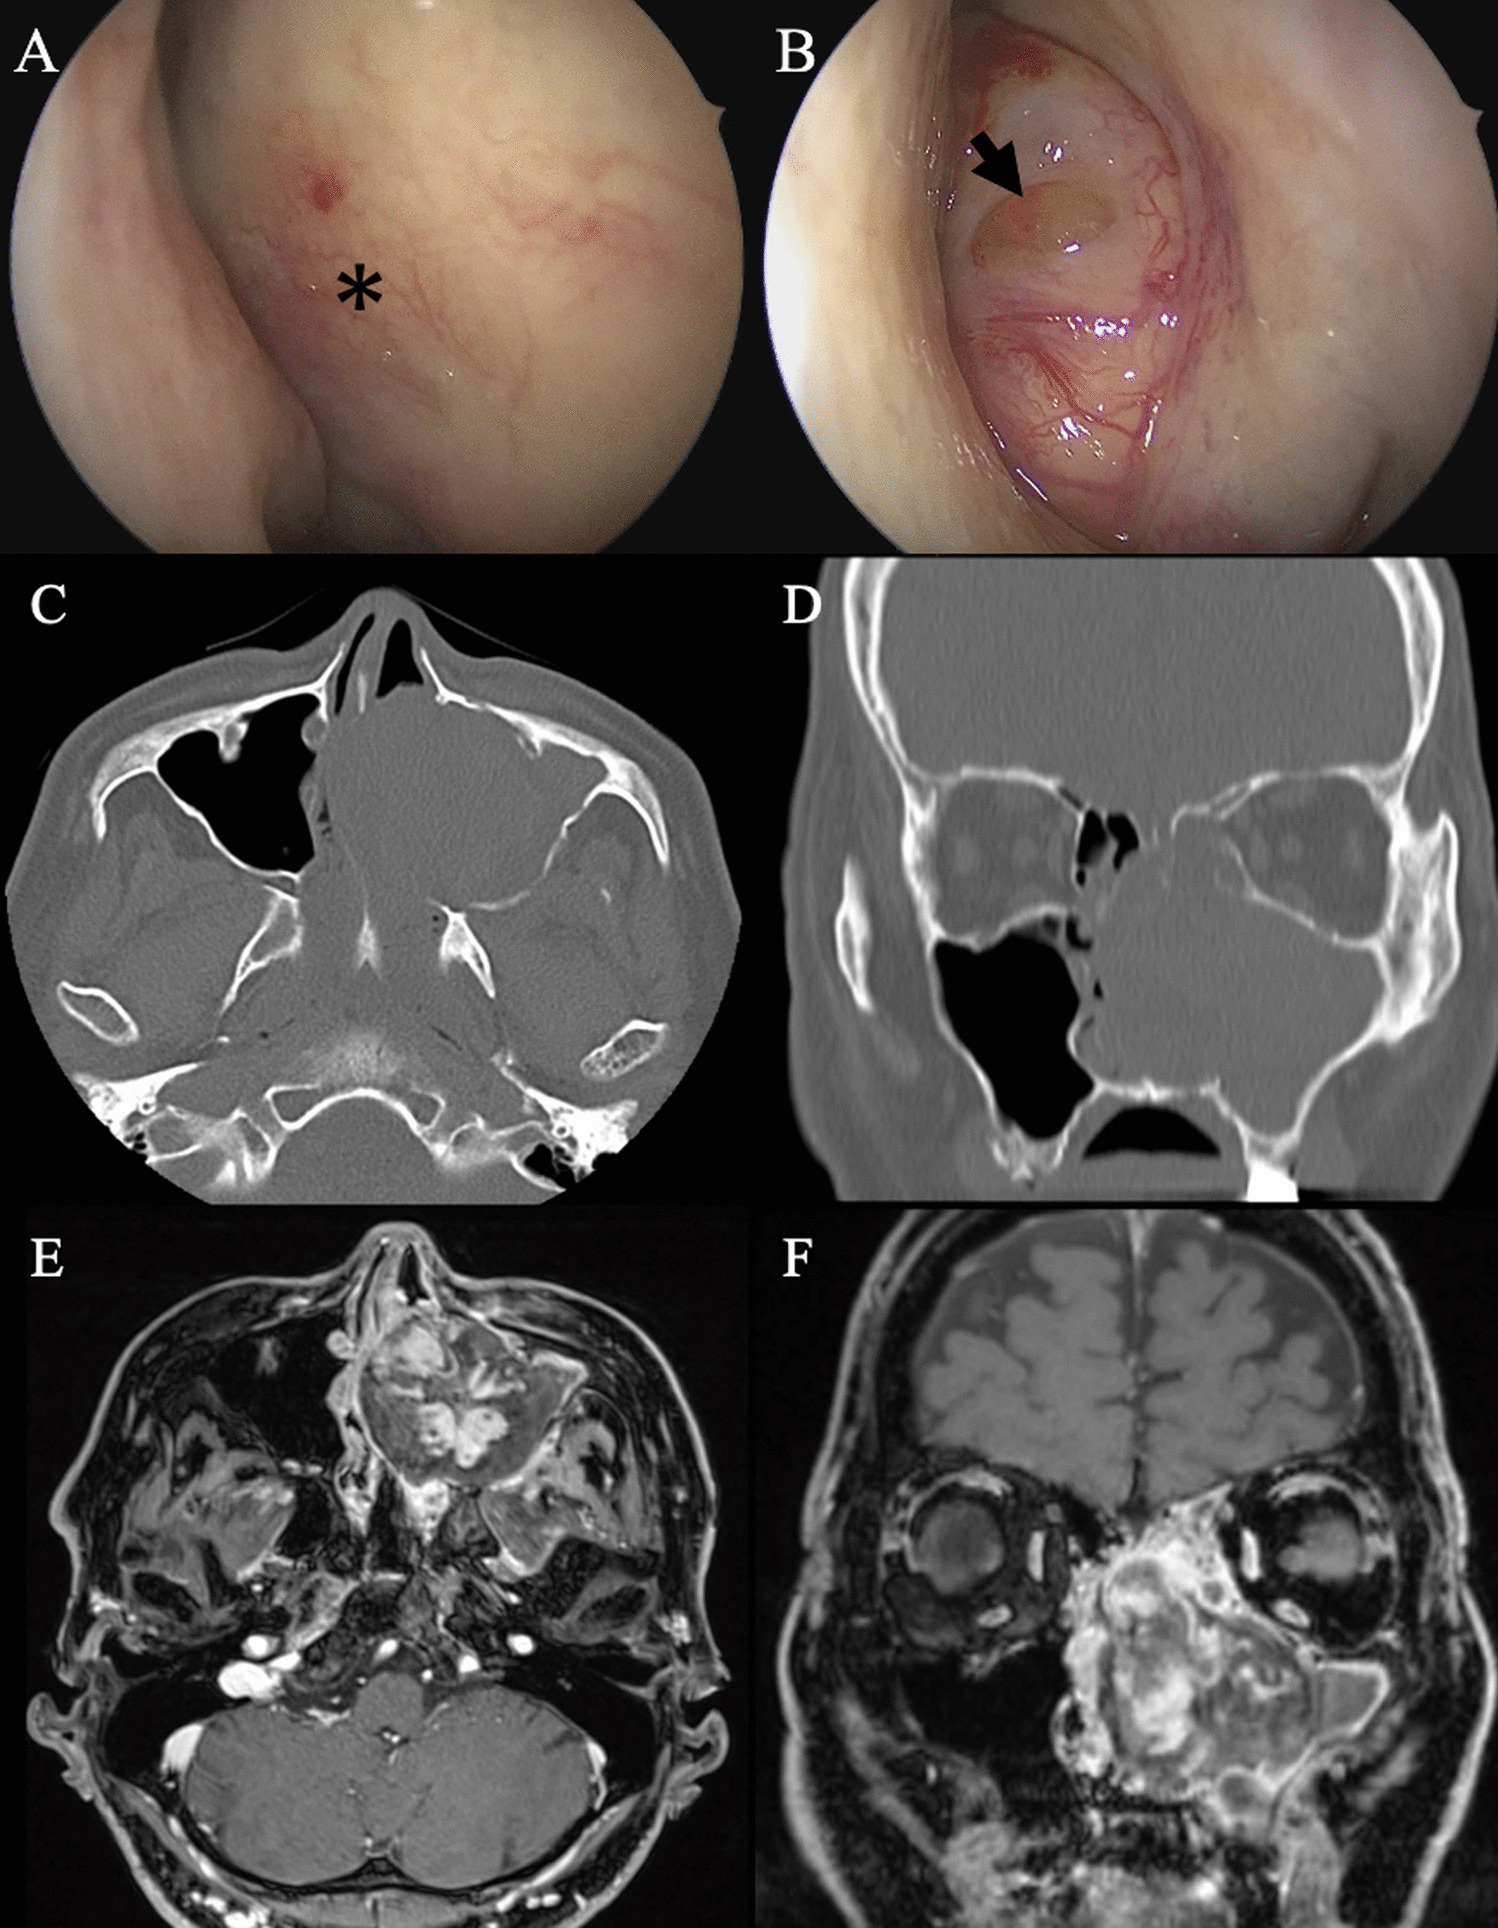 Intravascular papillary endothelial hyperplasia of the maxillary sinus extending into the contralateral nasal cavity